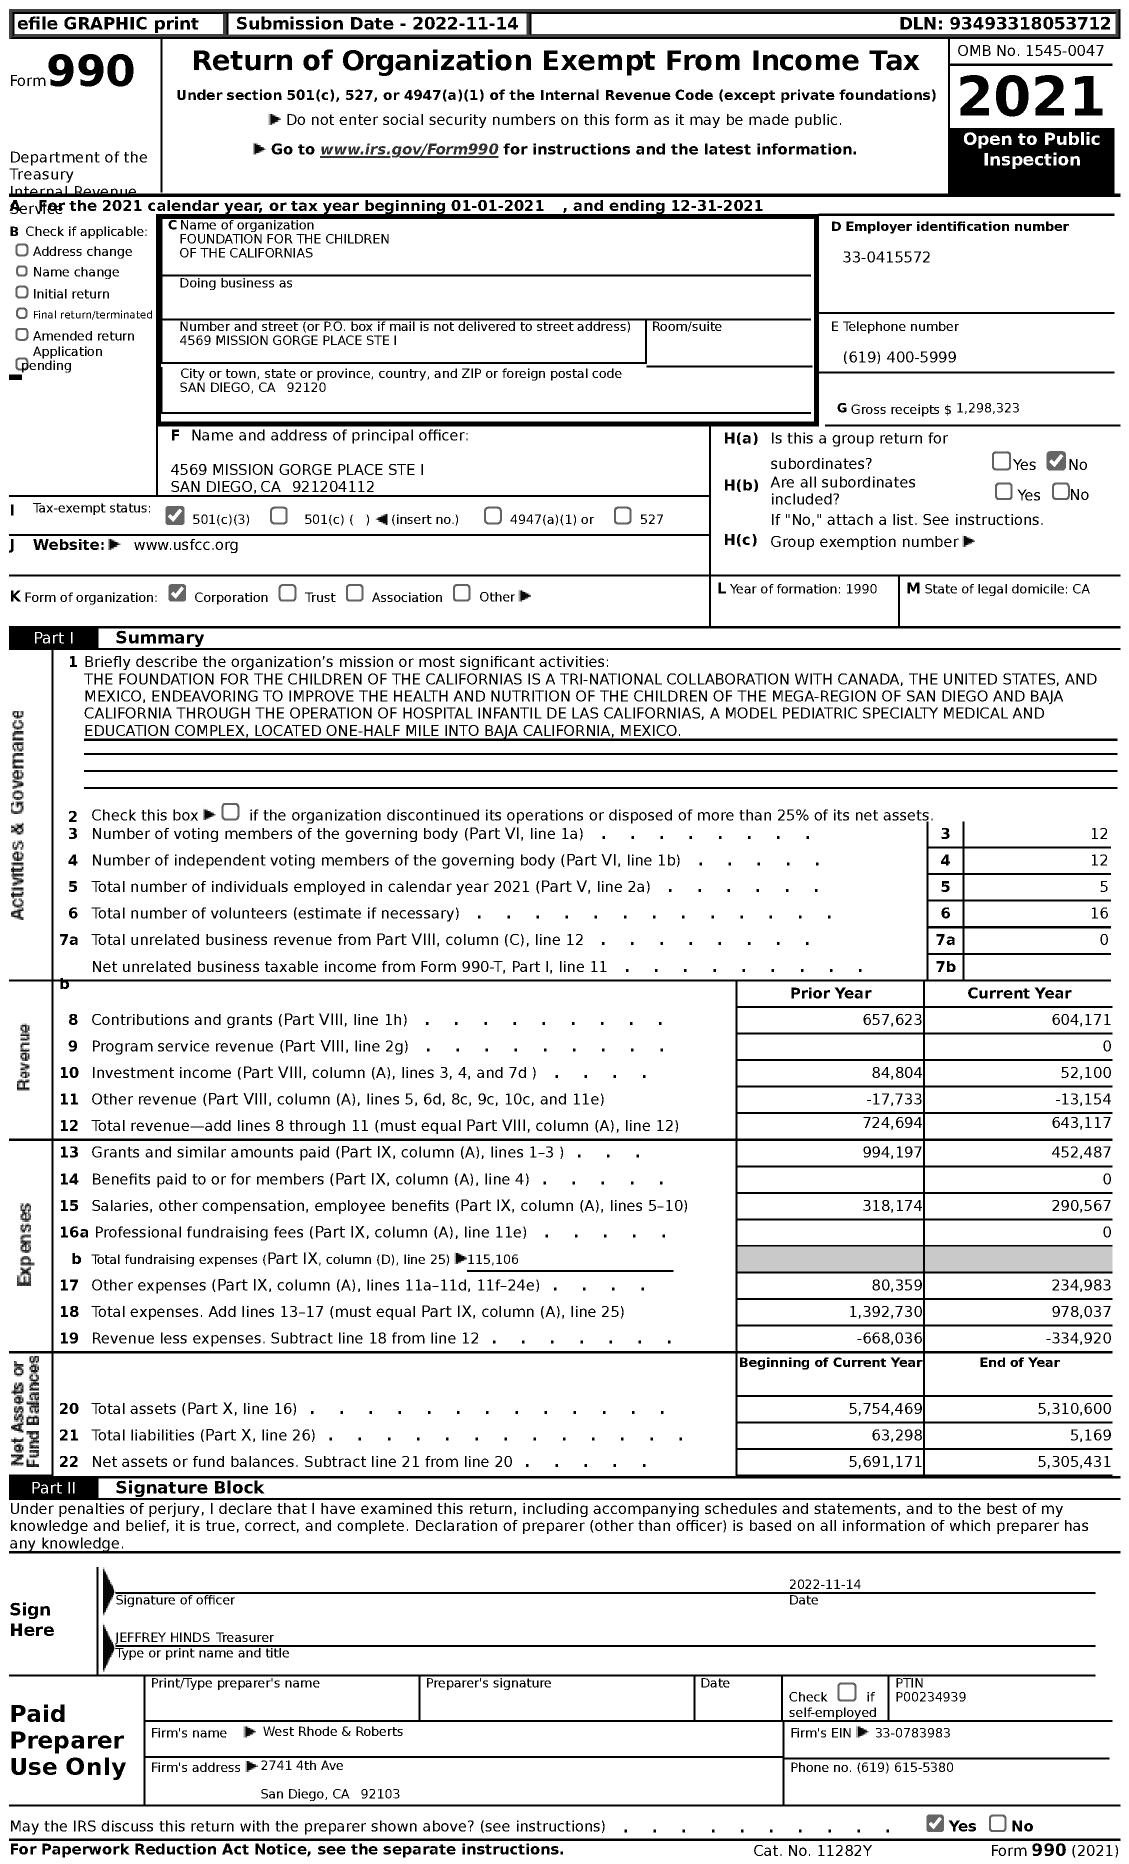 Image of first page of 2021 Form 990 for Foundation for the Children of the Californias